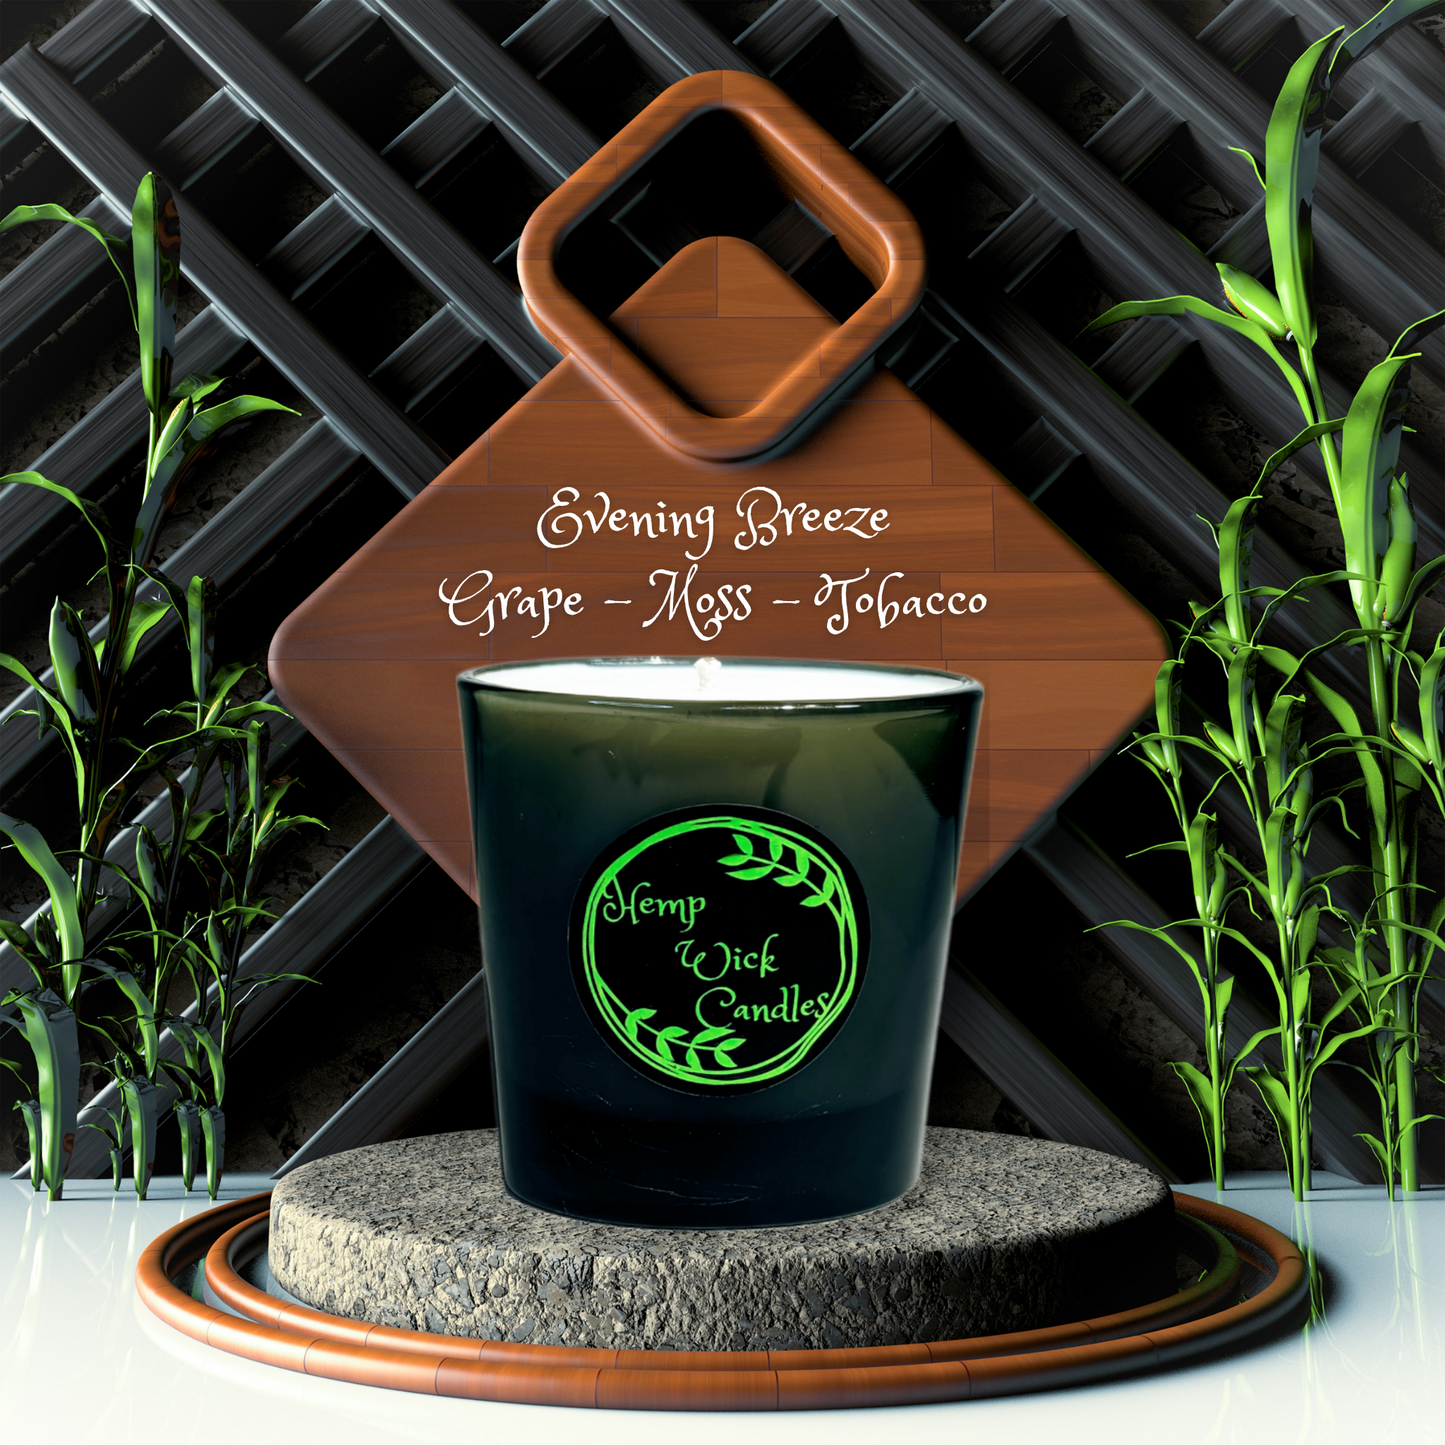 Evening Breeze Candle